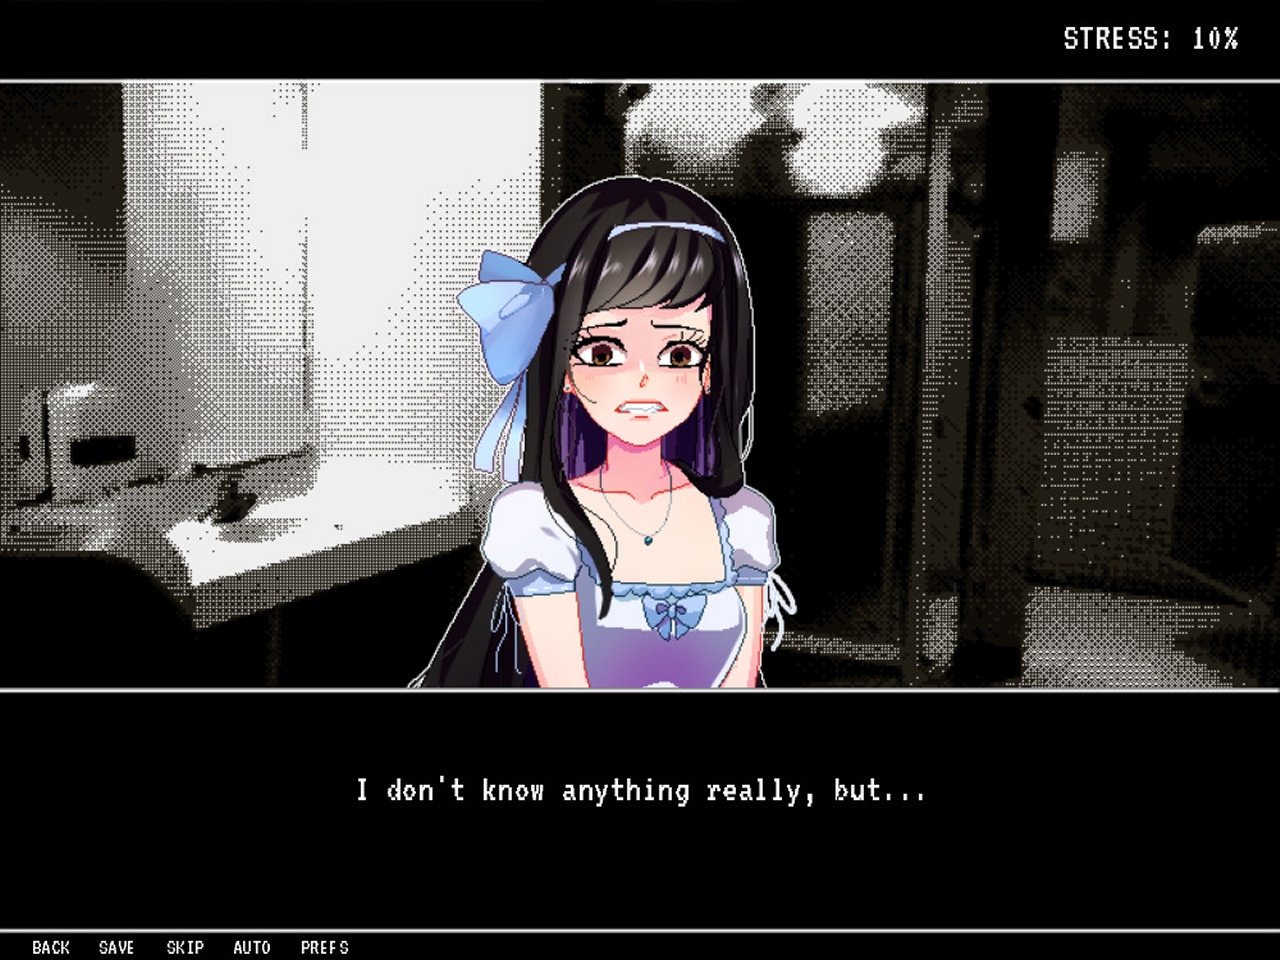 VN Reviews: “Lynne”, “The Waters Above: Prelude”, and “The Average Everyday Adventures of Samantha Browne”.